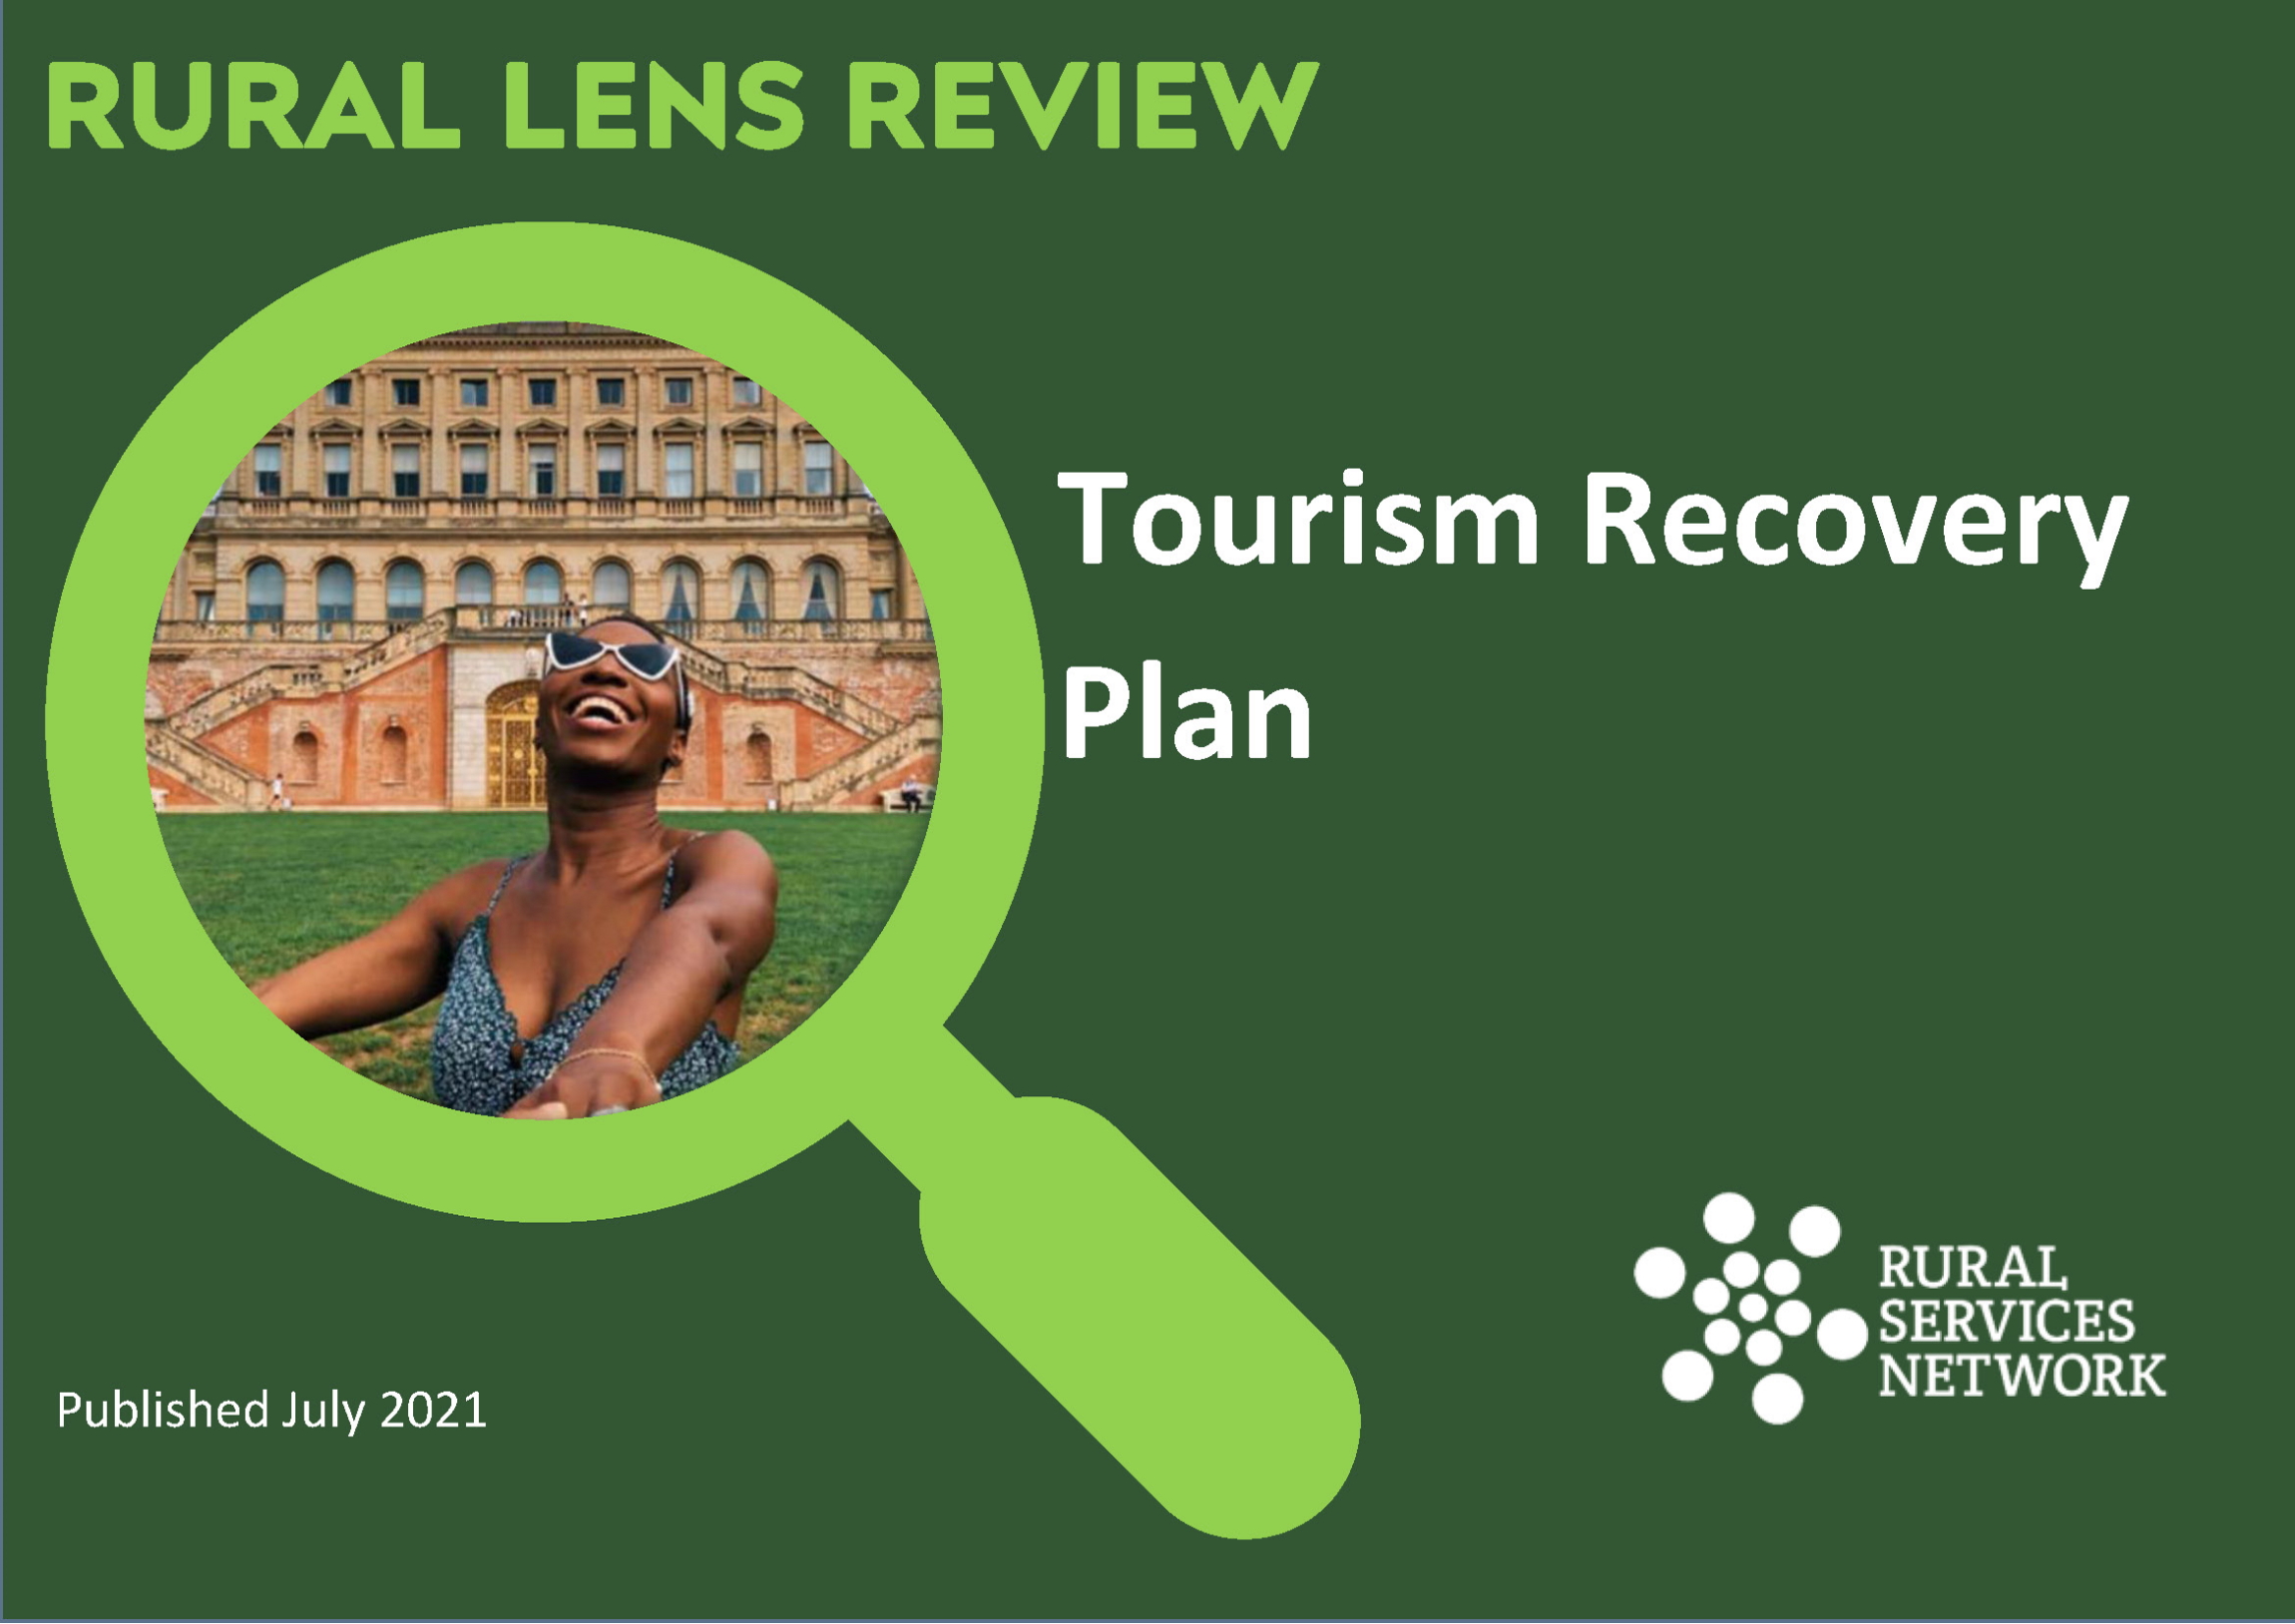 the tourism recovery plan